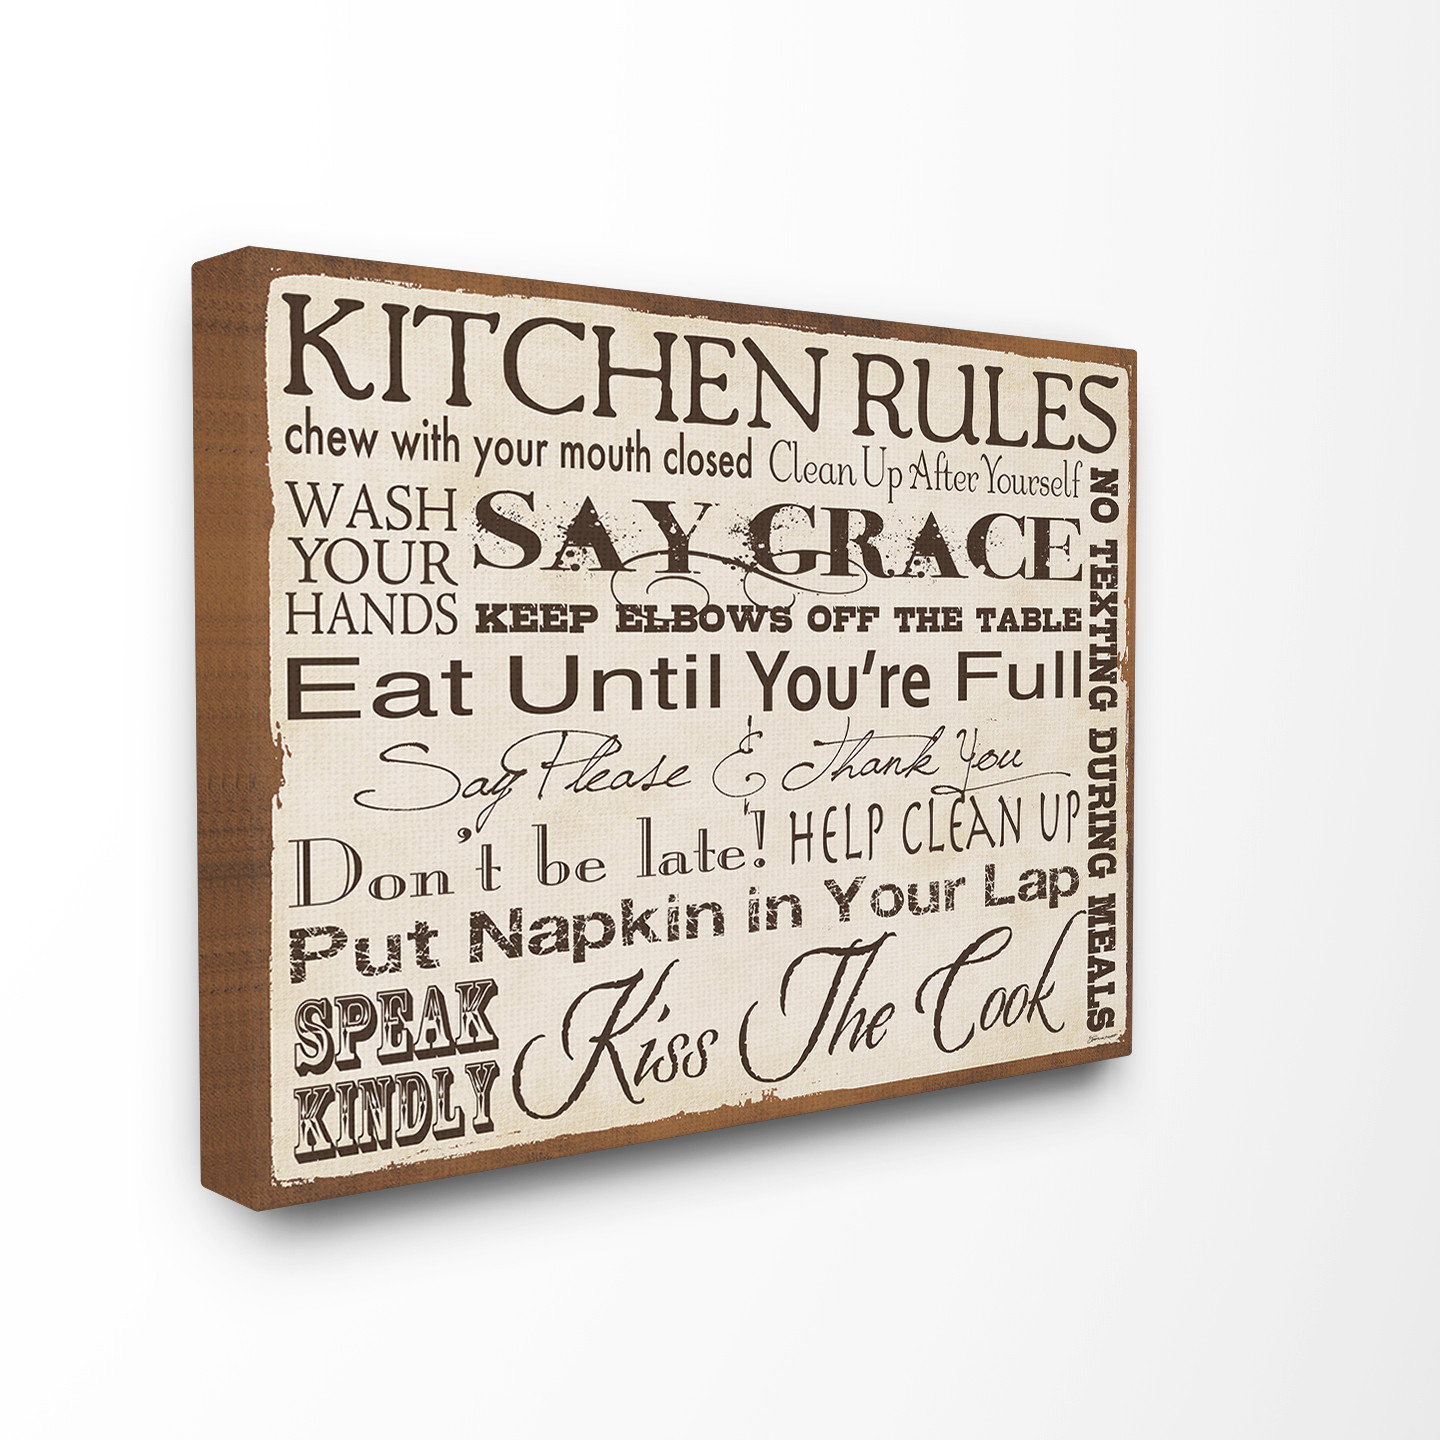 Kitchen Rules Wall Decor
 The Stupell Home Decor Collection Kitchen Rules Creme